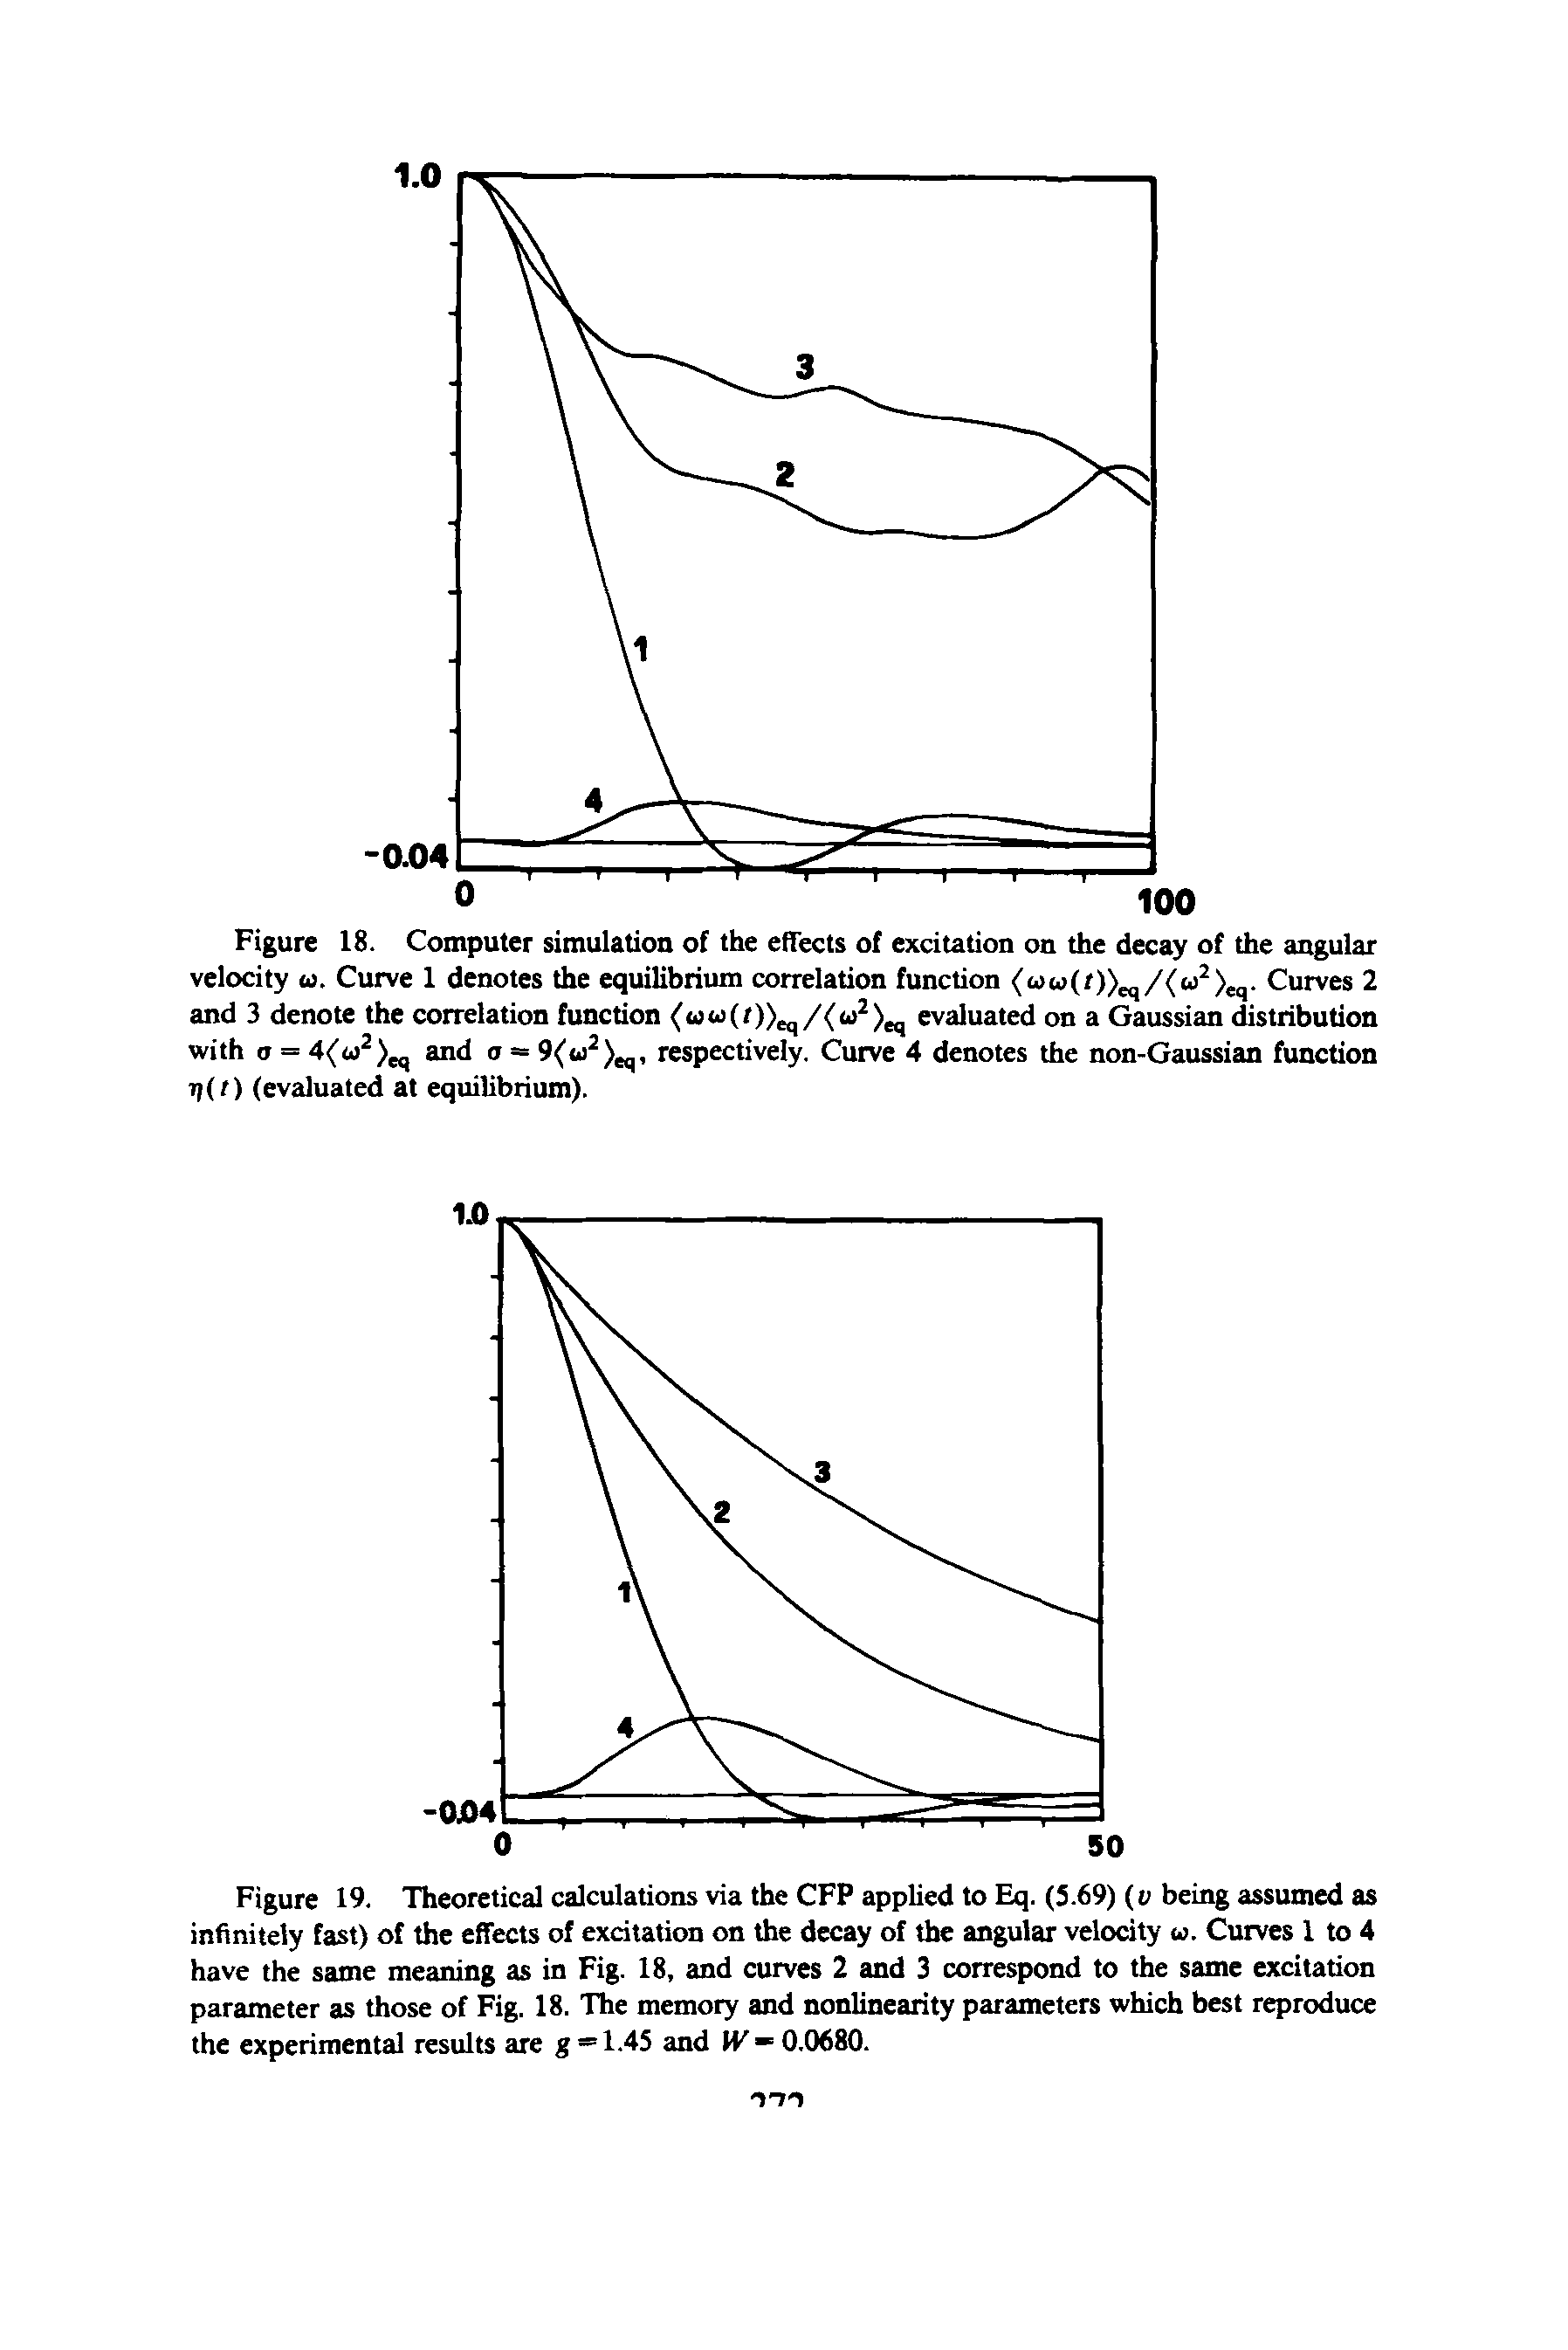 Figure 19. Theoretical calculations via the CFP applied to Eq. (5.69) (v being assumed as infinitely fast) of the effects of excitation on the decay of the angular velocity u. Curves 1 to 4 have the same meaning as in Fig. 18, and curves 2 and 3 correspond to the same excitation parameter as those of Fig. 18. The memory and nonlinearity parameters which best reproduce the experimental results are g = 1.45 and IF = 0.0680.